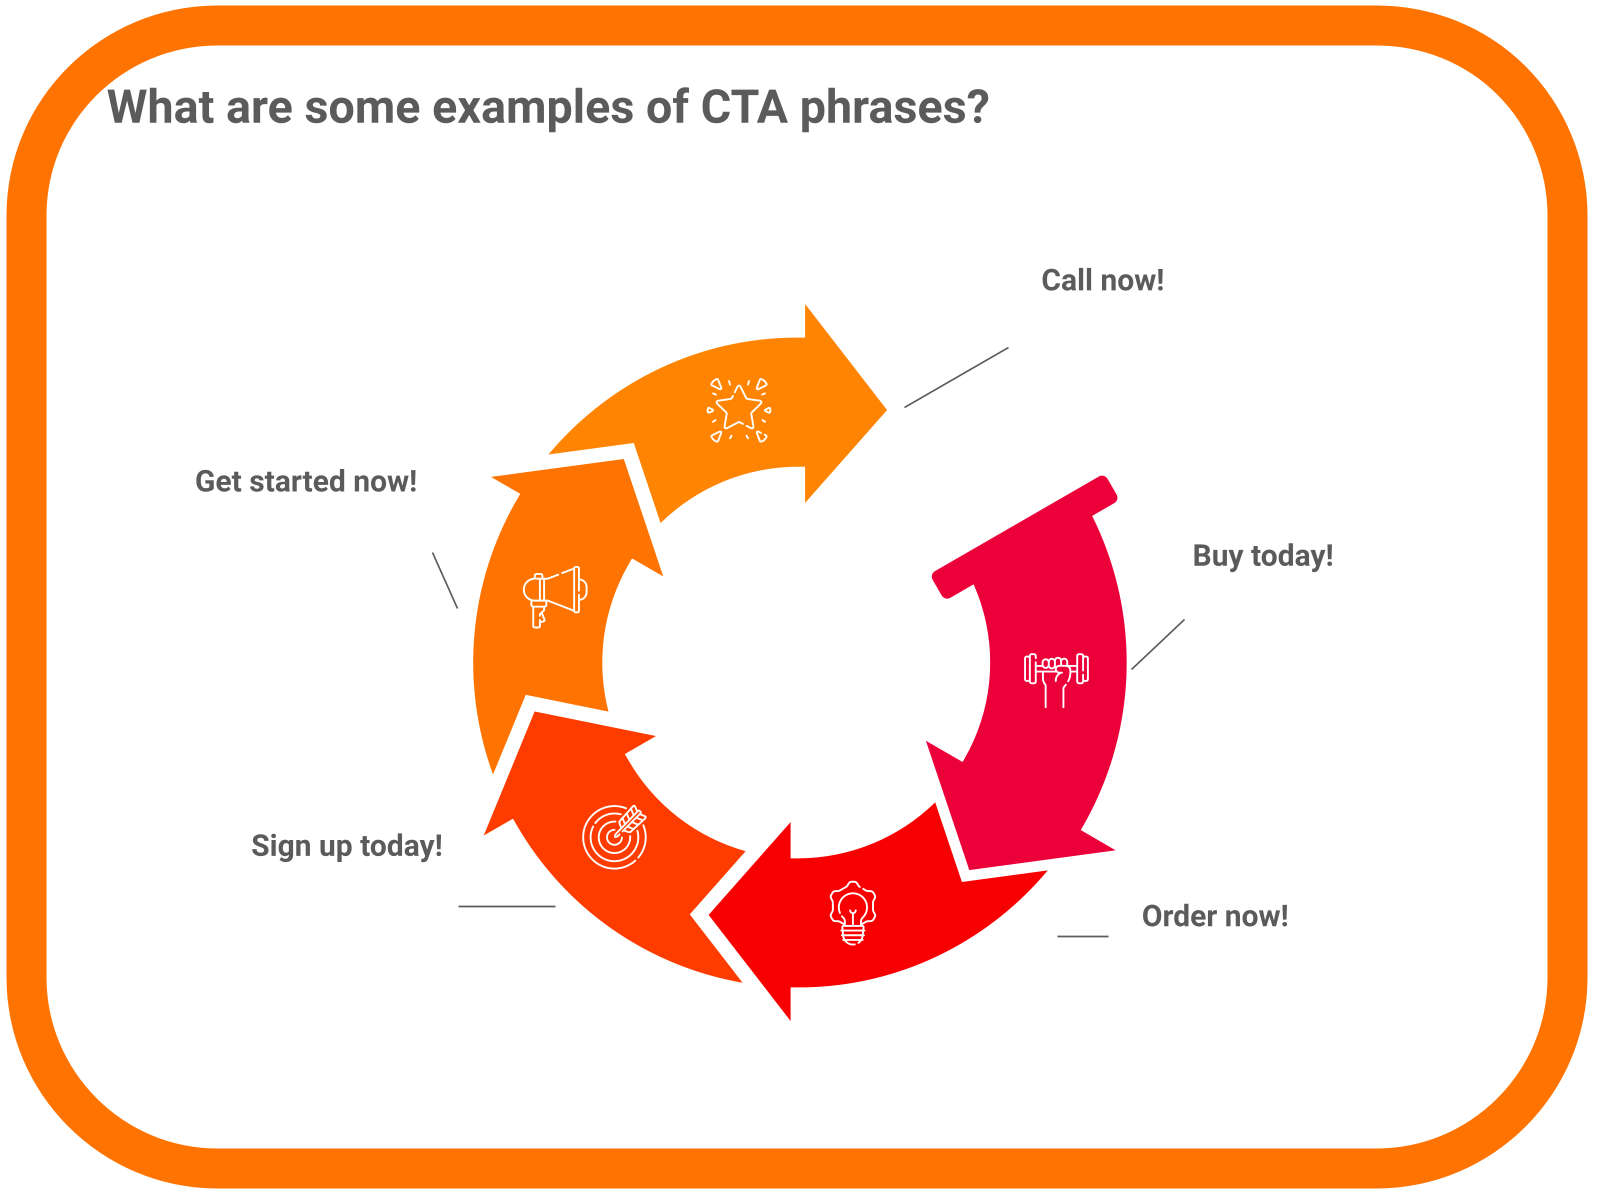 What are some examples of CTA phrases?